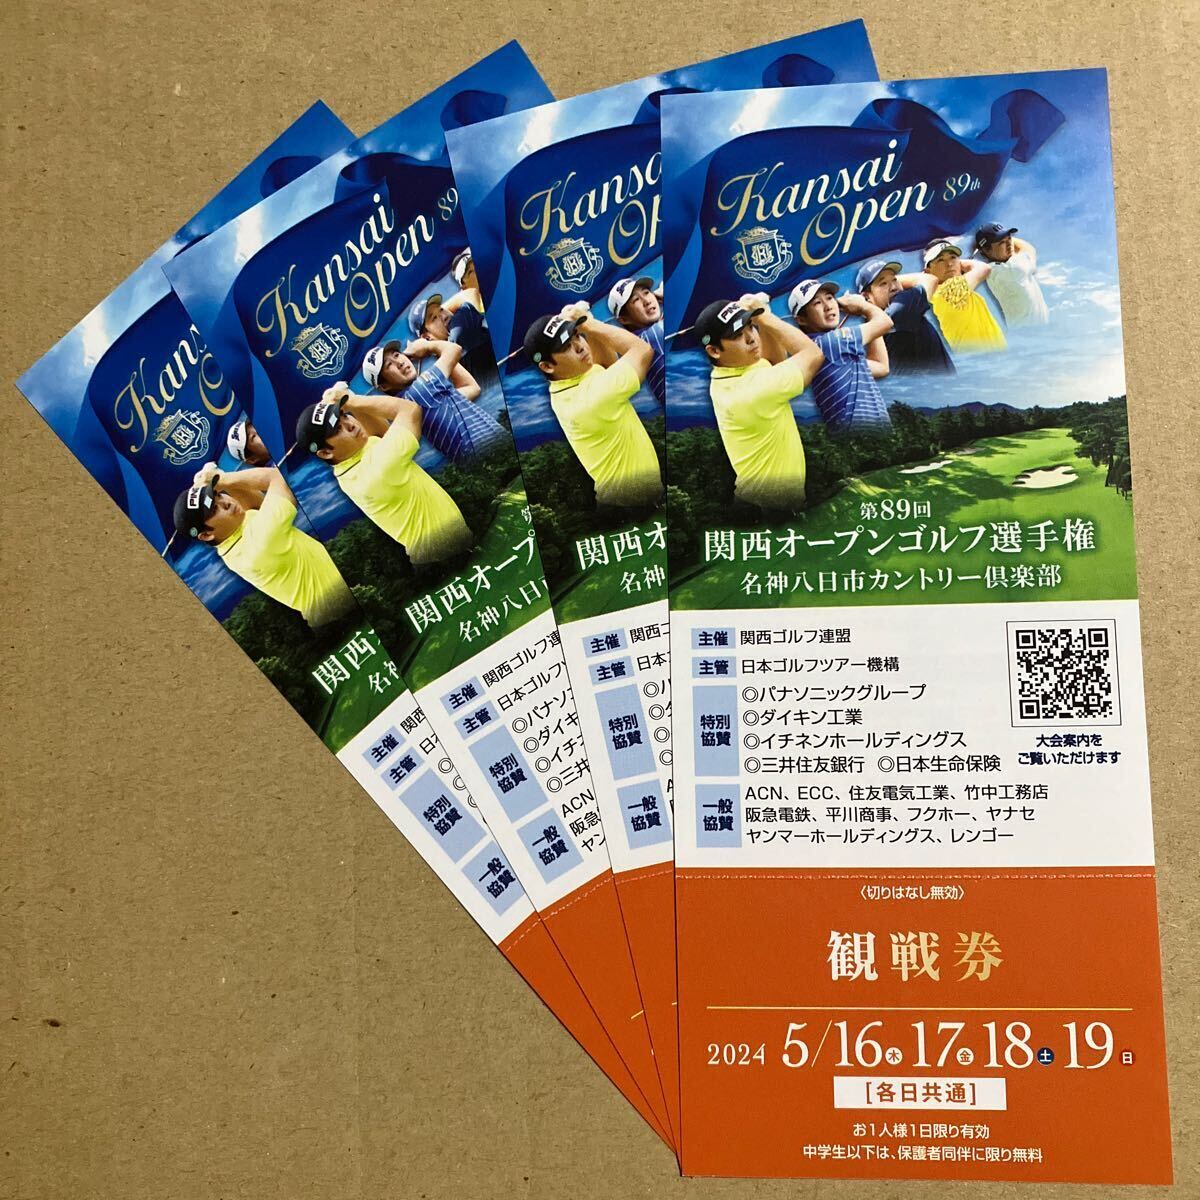  Kansai open Golf player right name god . day city Country club ticket 4 pieces set 